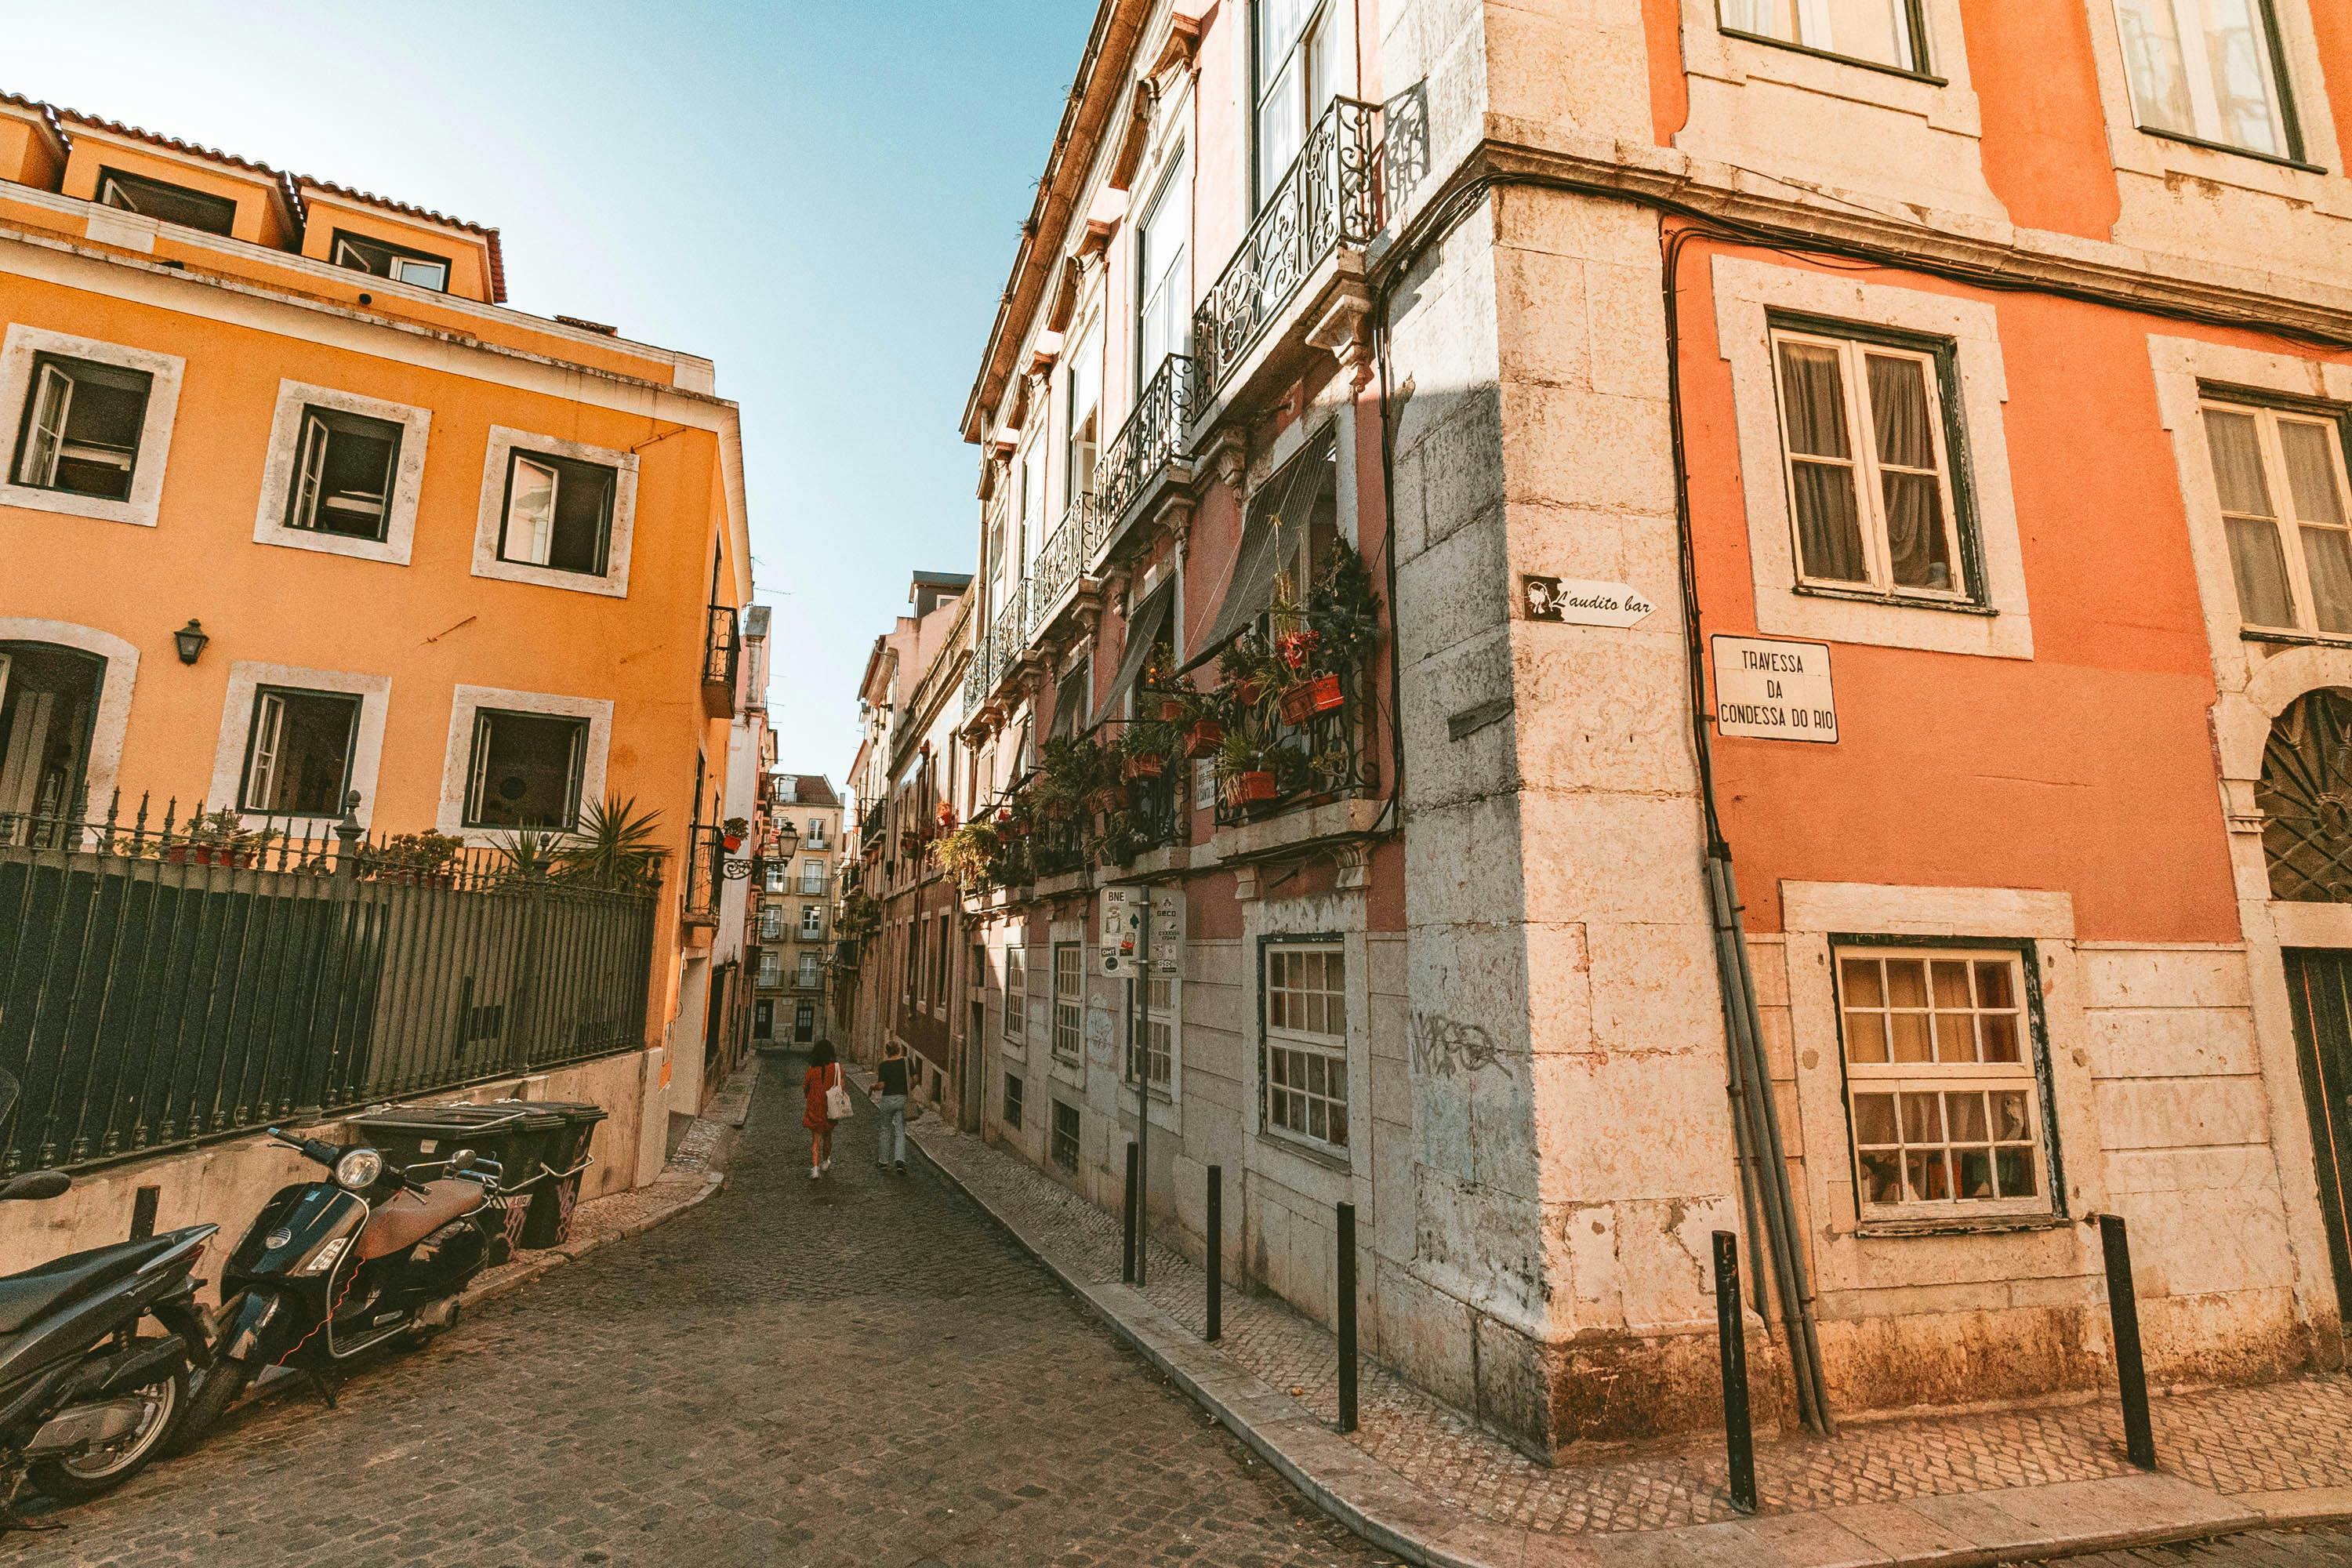 rustic buildings and angles in the alleyways of lisbon old town